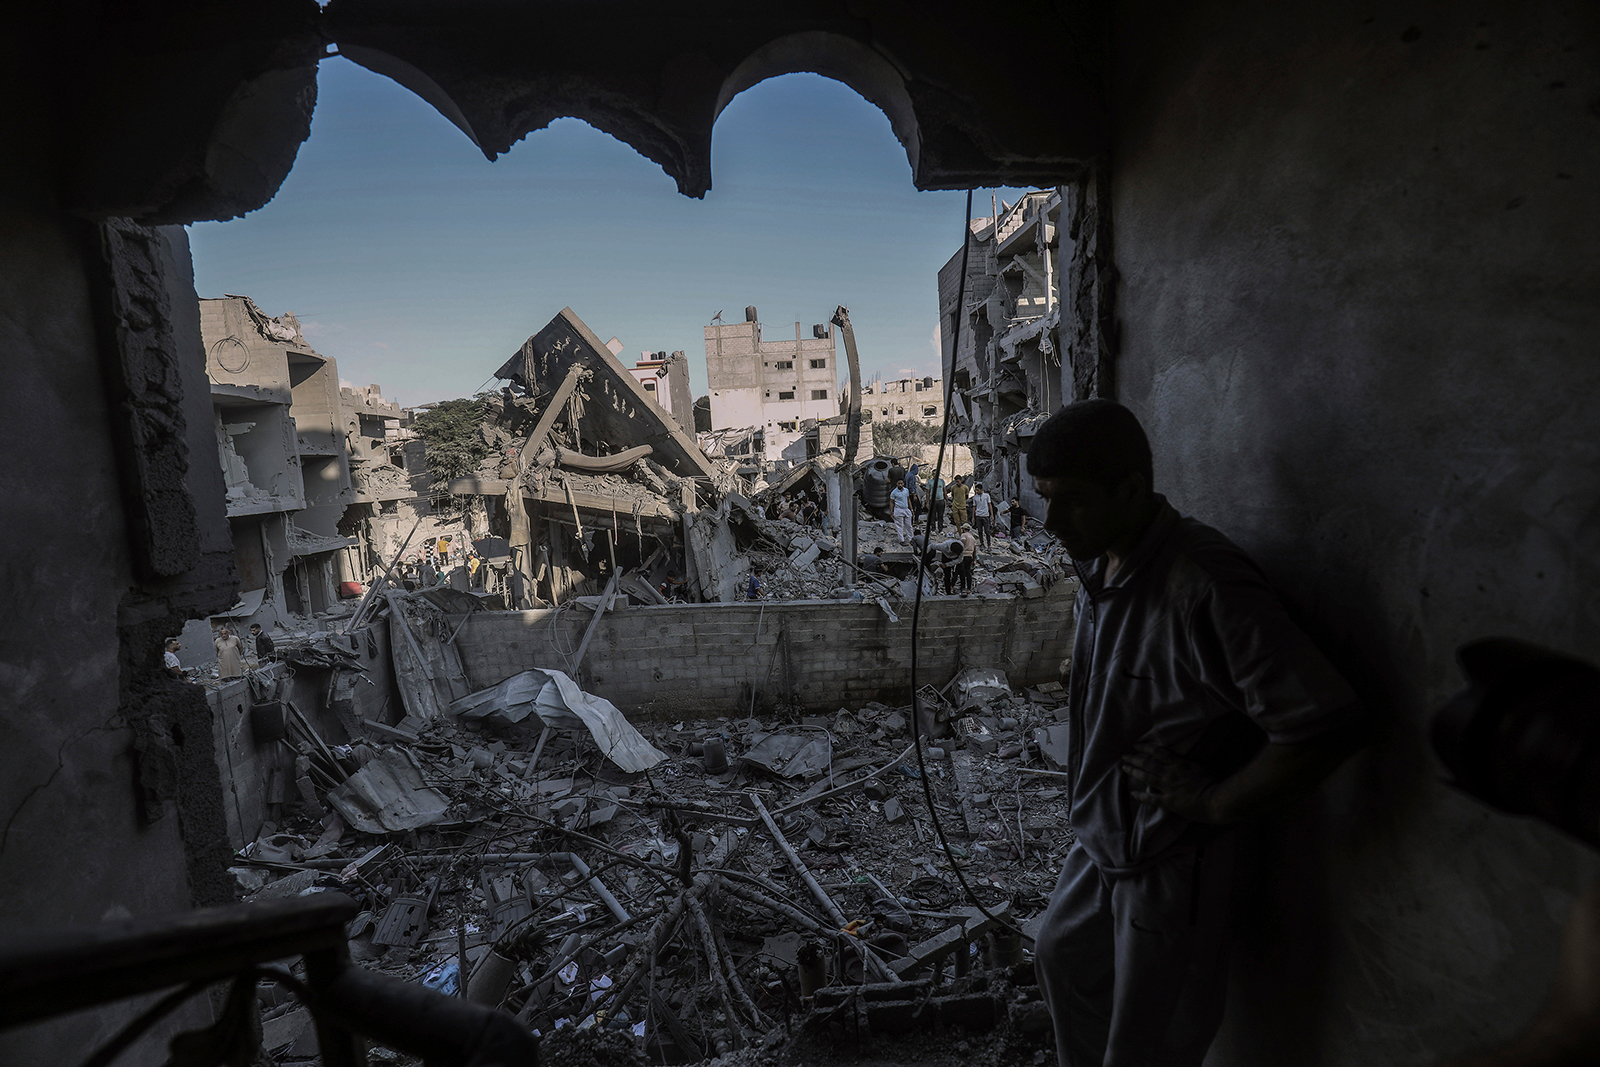 A Palestinian man inspects a destroyed house belonging to the Al-Jazzar family after an airstrike that killed eight people in Palestinian Territories, Rafah on October 18.